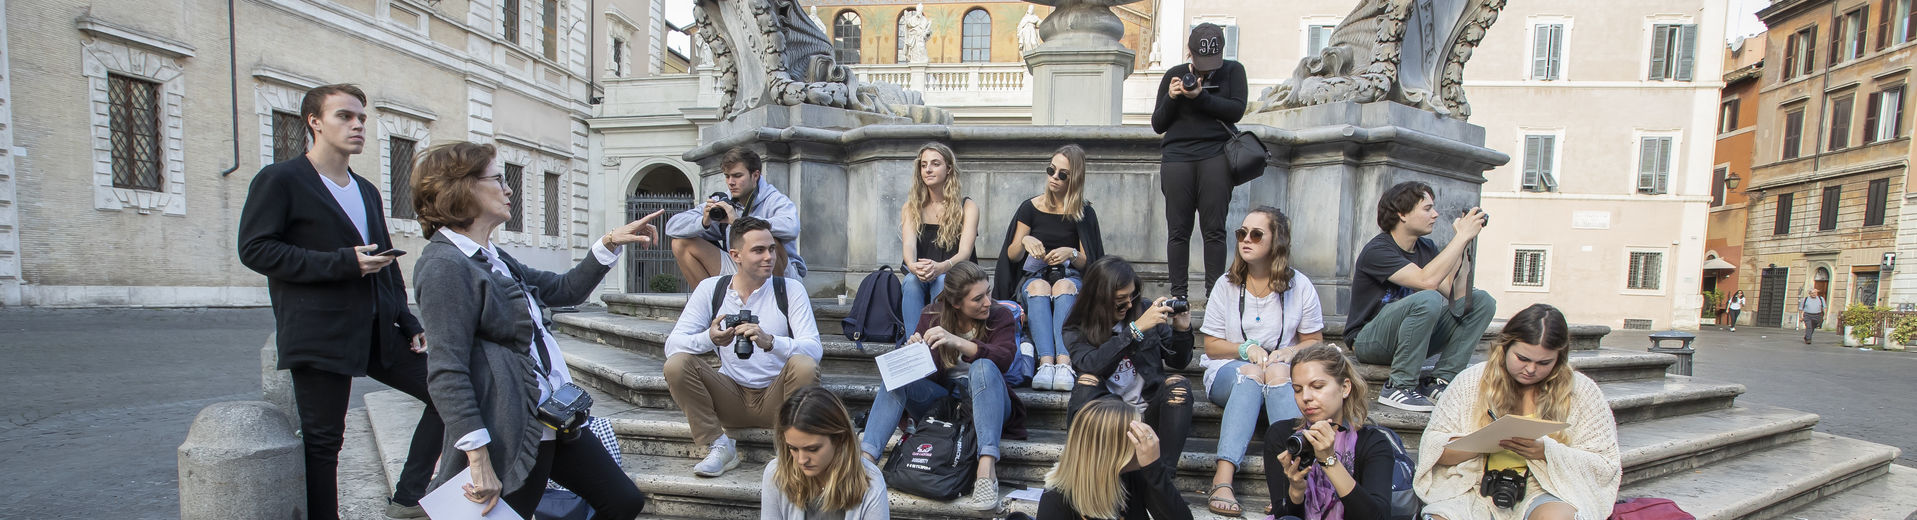 A group of Temple students gather at a fountain in Rome, Italy.